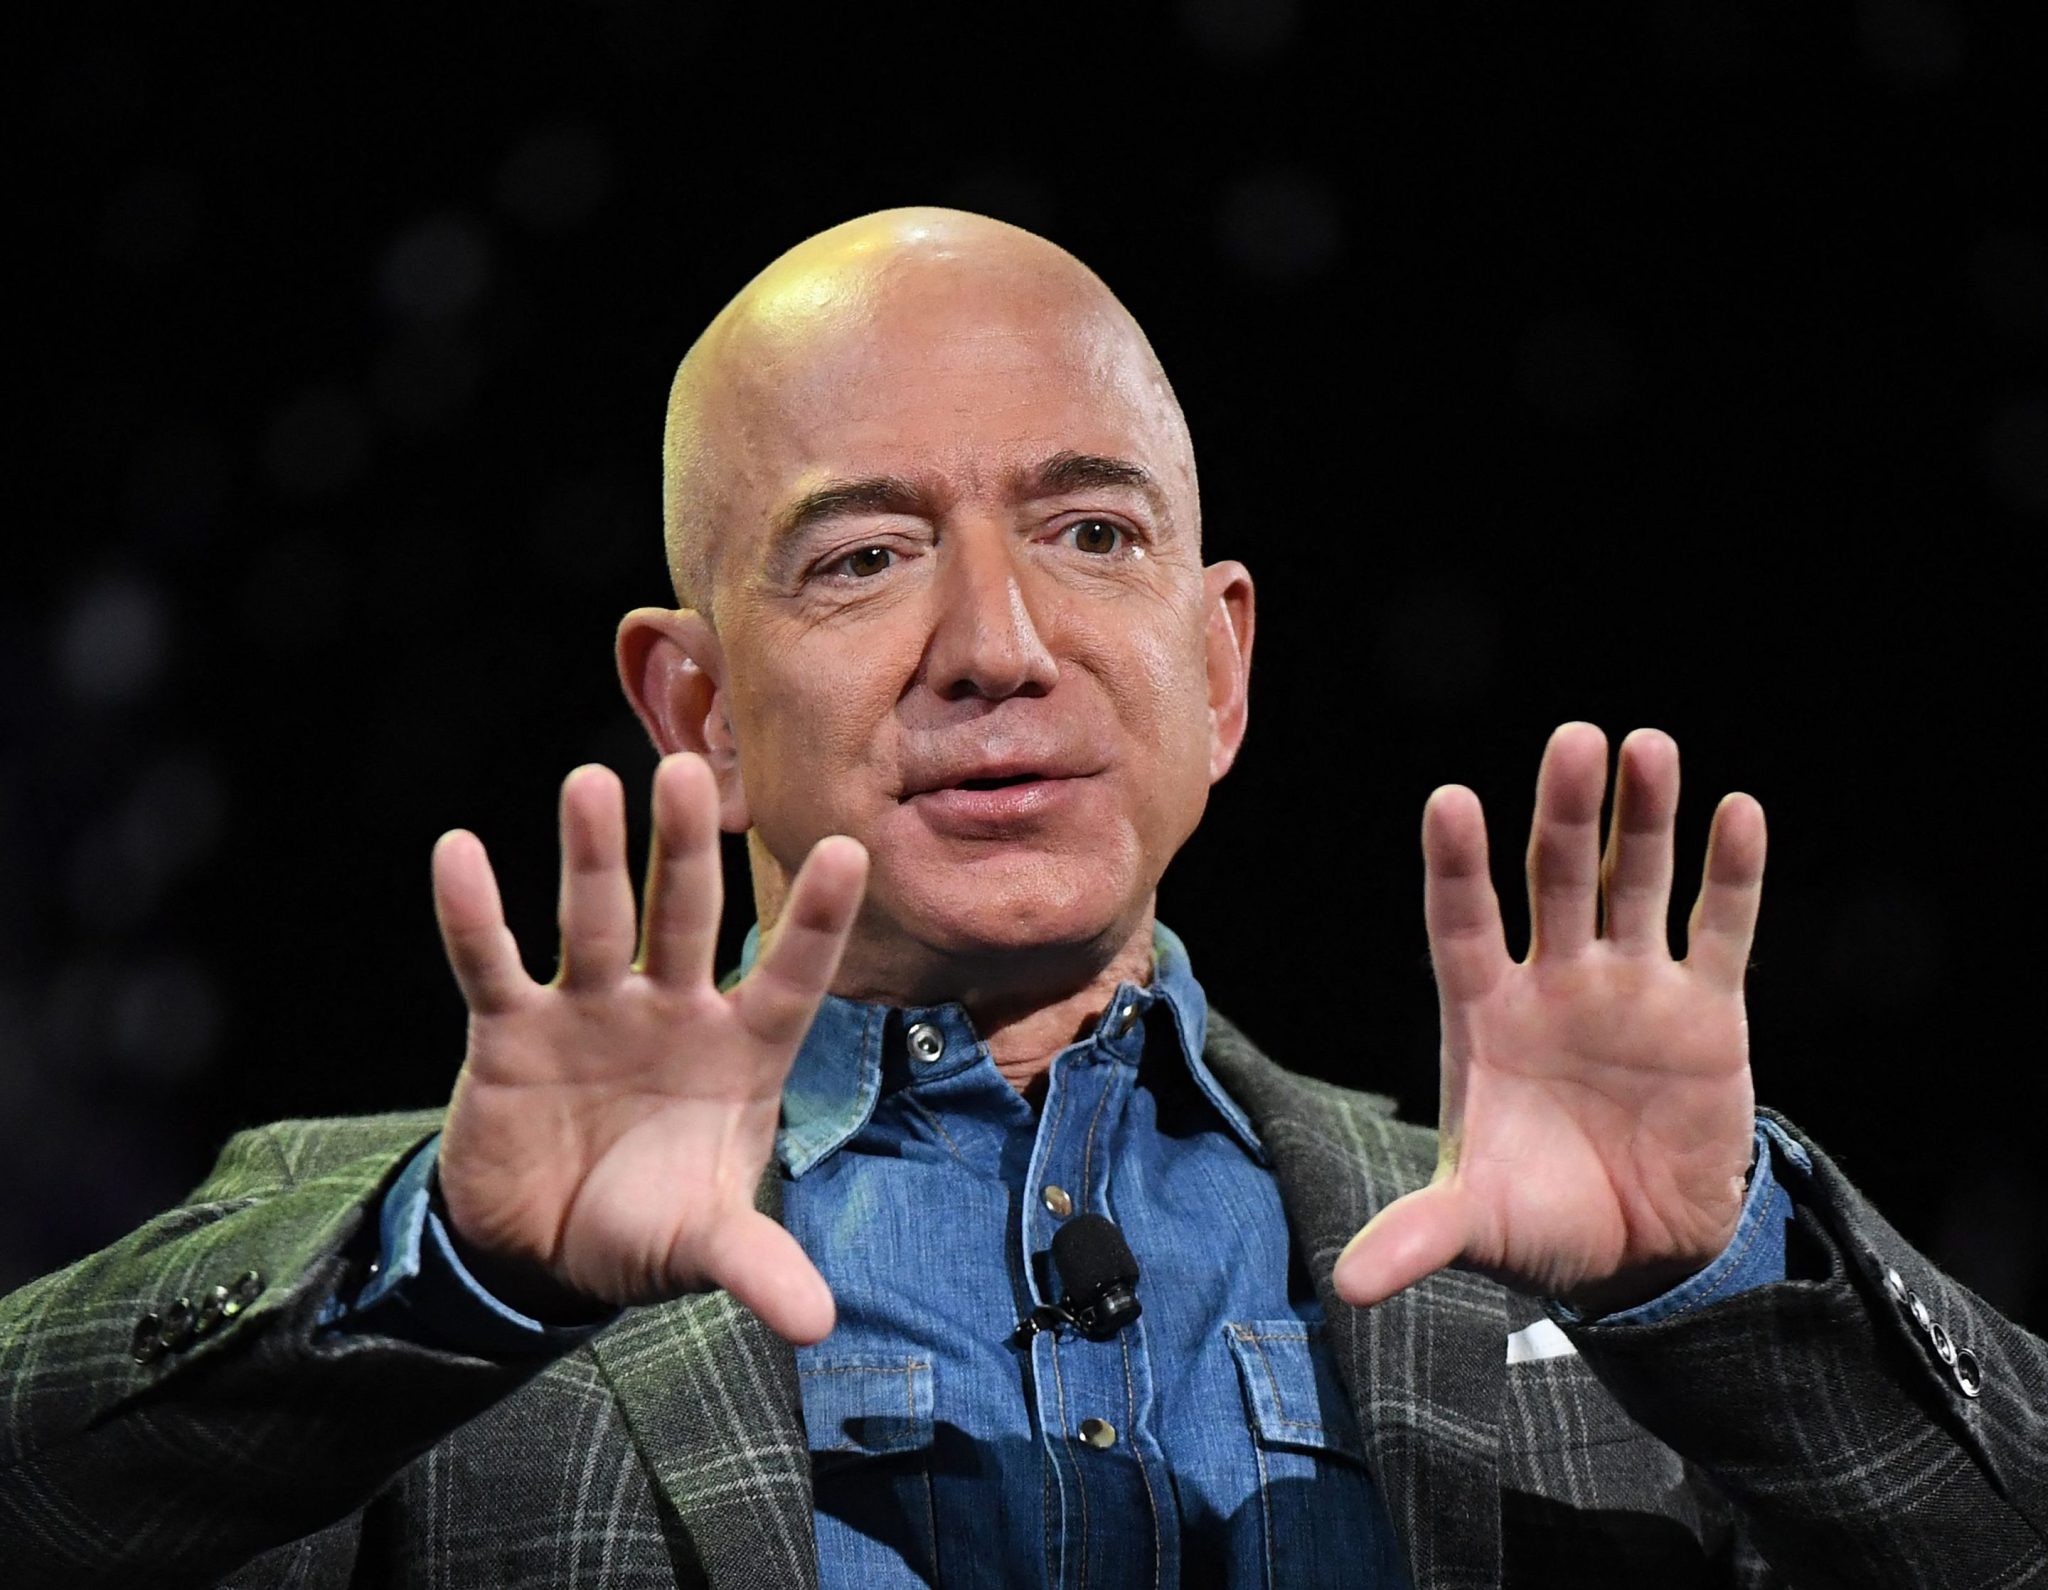 Jeff Bezos pushed Amazon’s algorithm to show “irrelevant” but profitable ads, not the best product, government claims